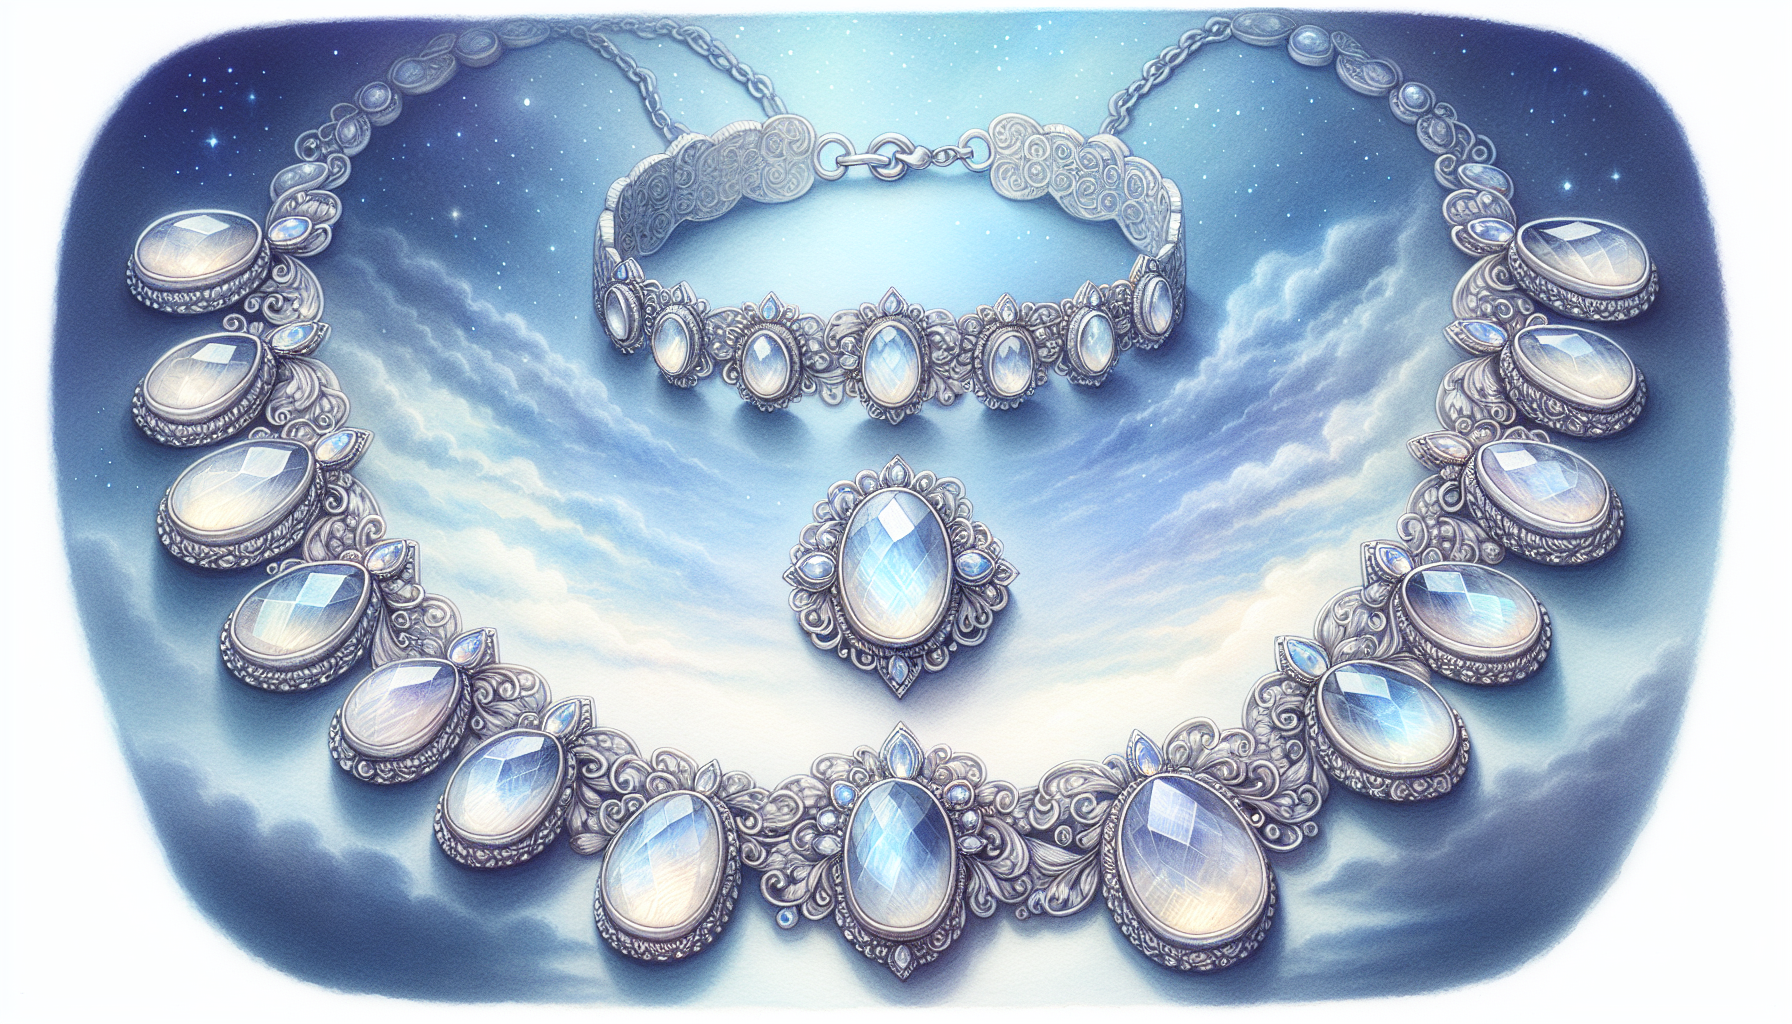 Illustration of moonstone jewelry including necklace and bracelet